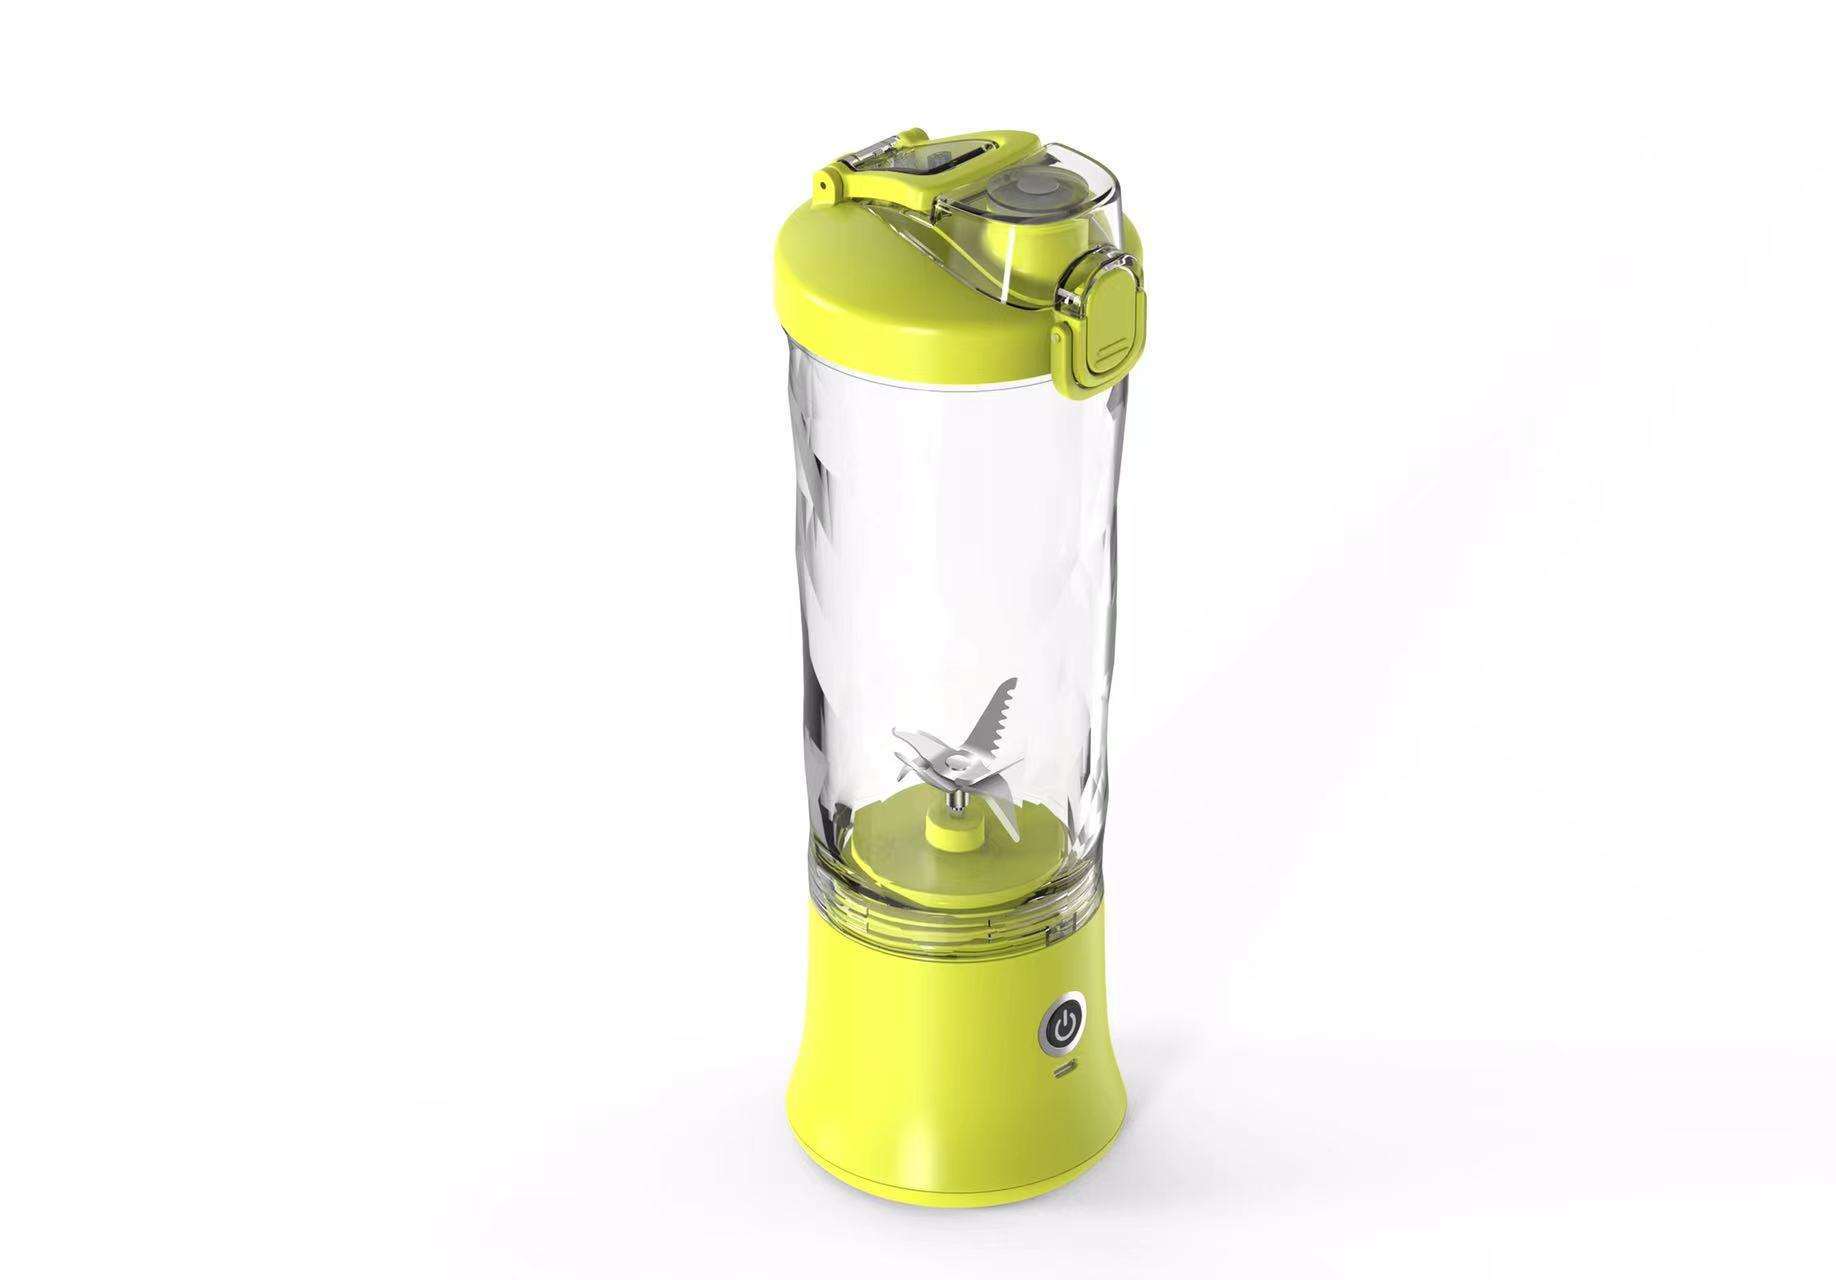 Transparent electric Dual-purpose Juicing Cup with a green base and lid, featuring stainless steel blades and a central blending shaft, along with an on/off button at the front.